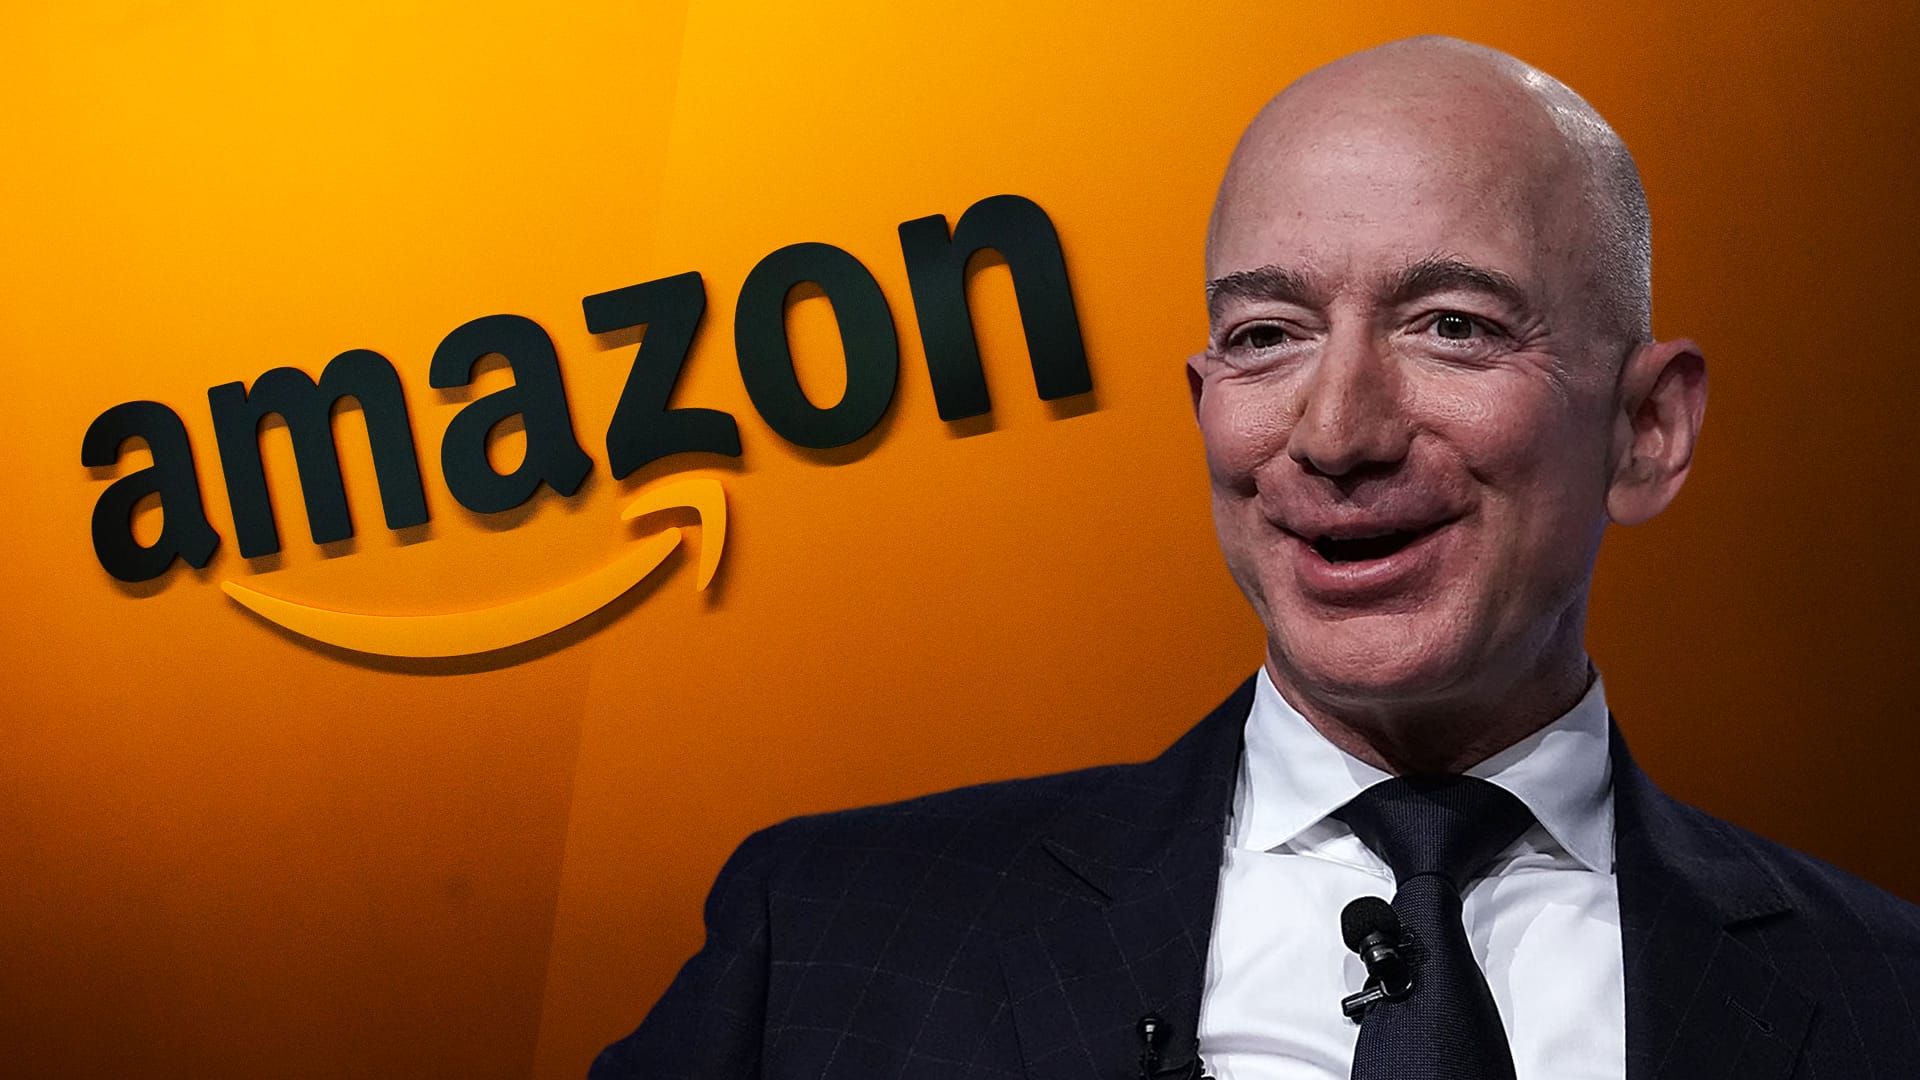 Jeff bezos challenges rival retailers to match amazon pay and benefits